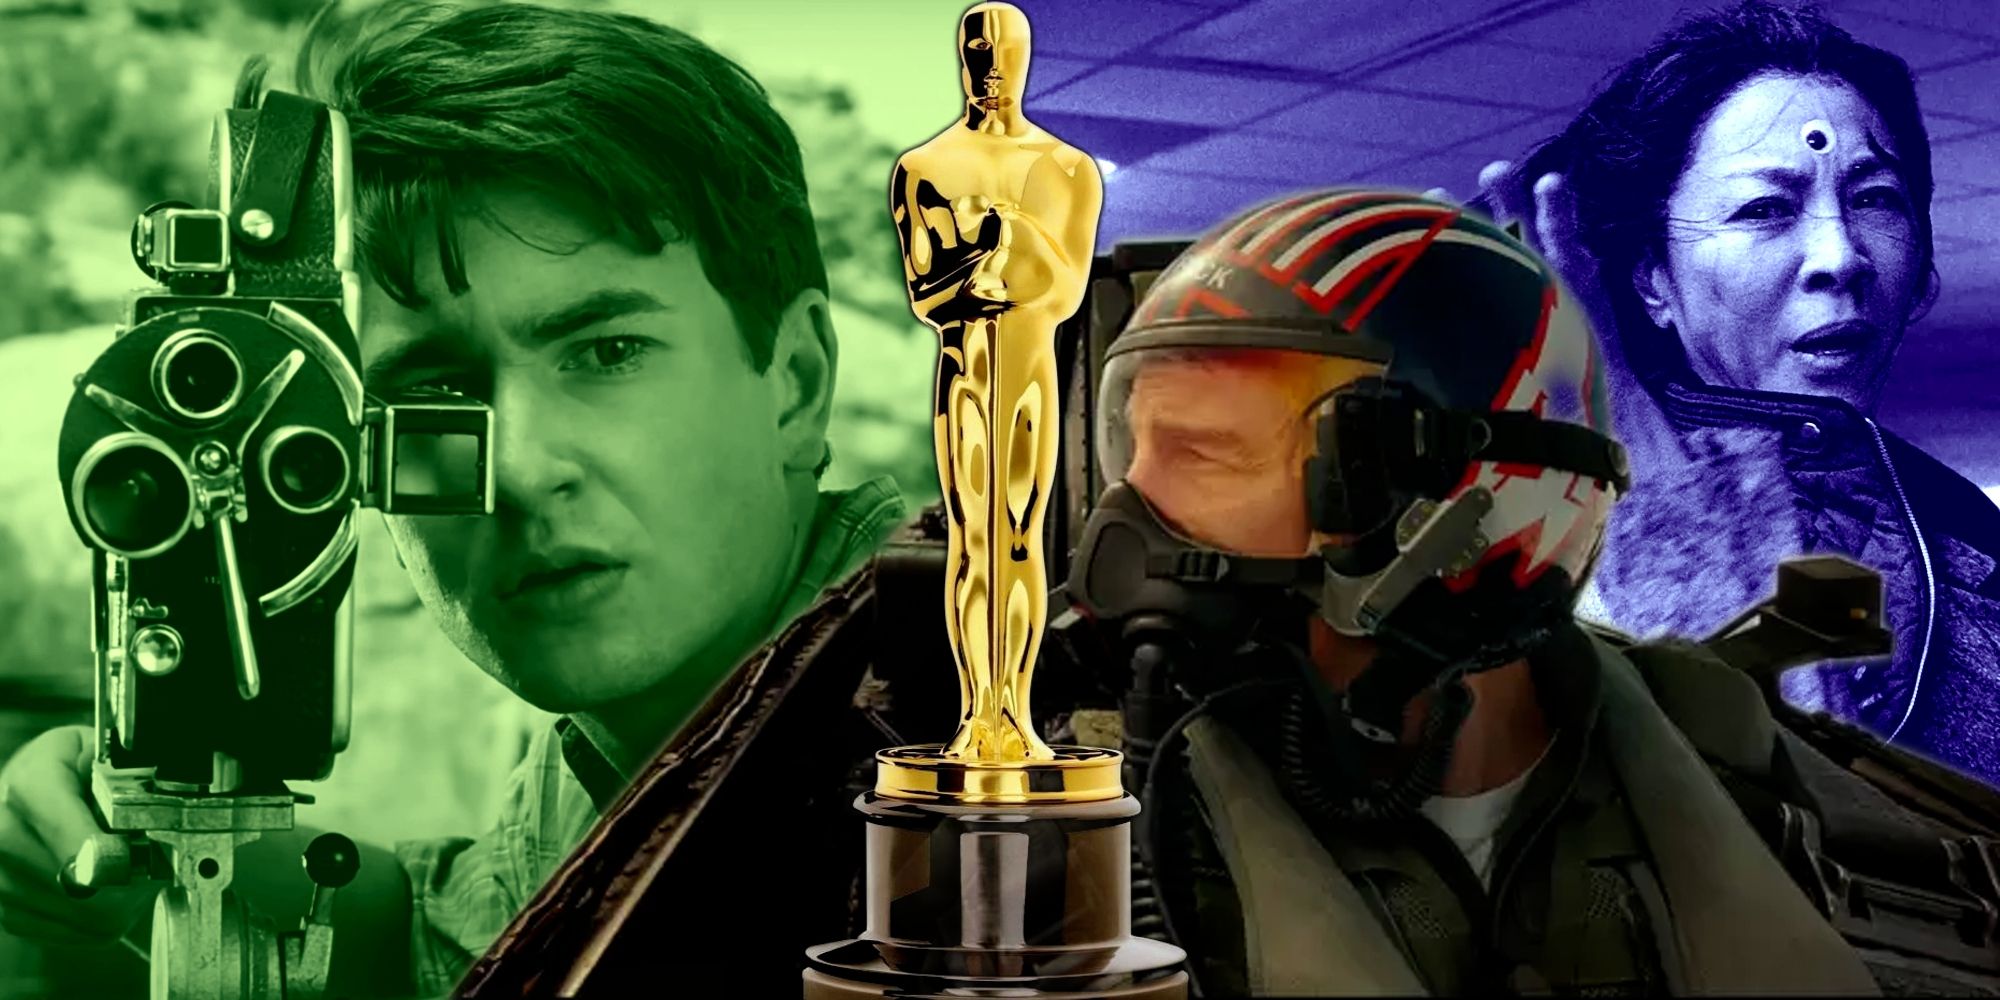 An Academy Award with screenshots from several best picture nominees.